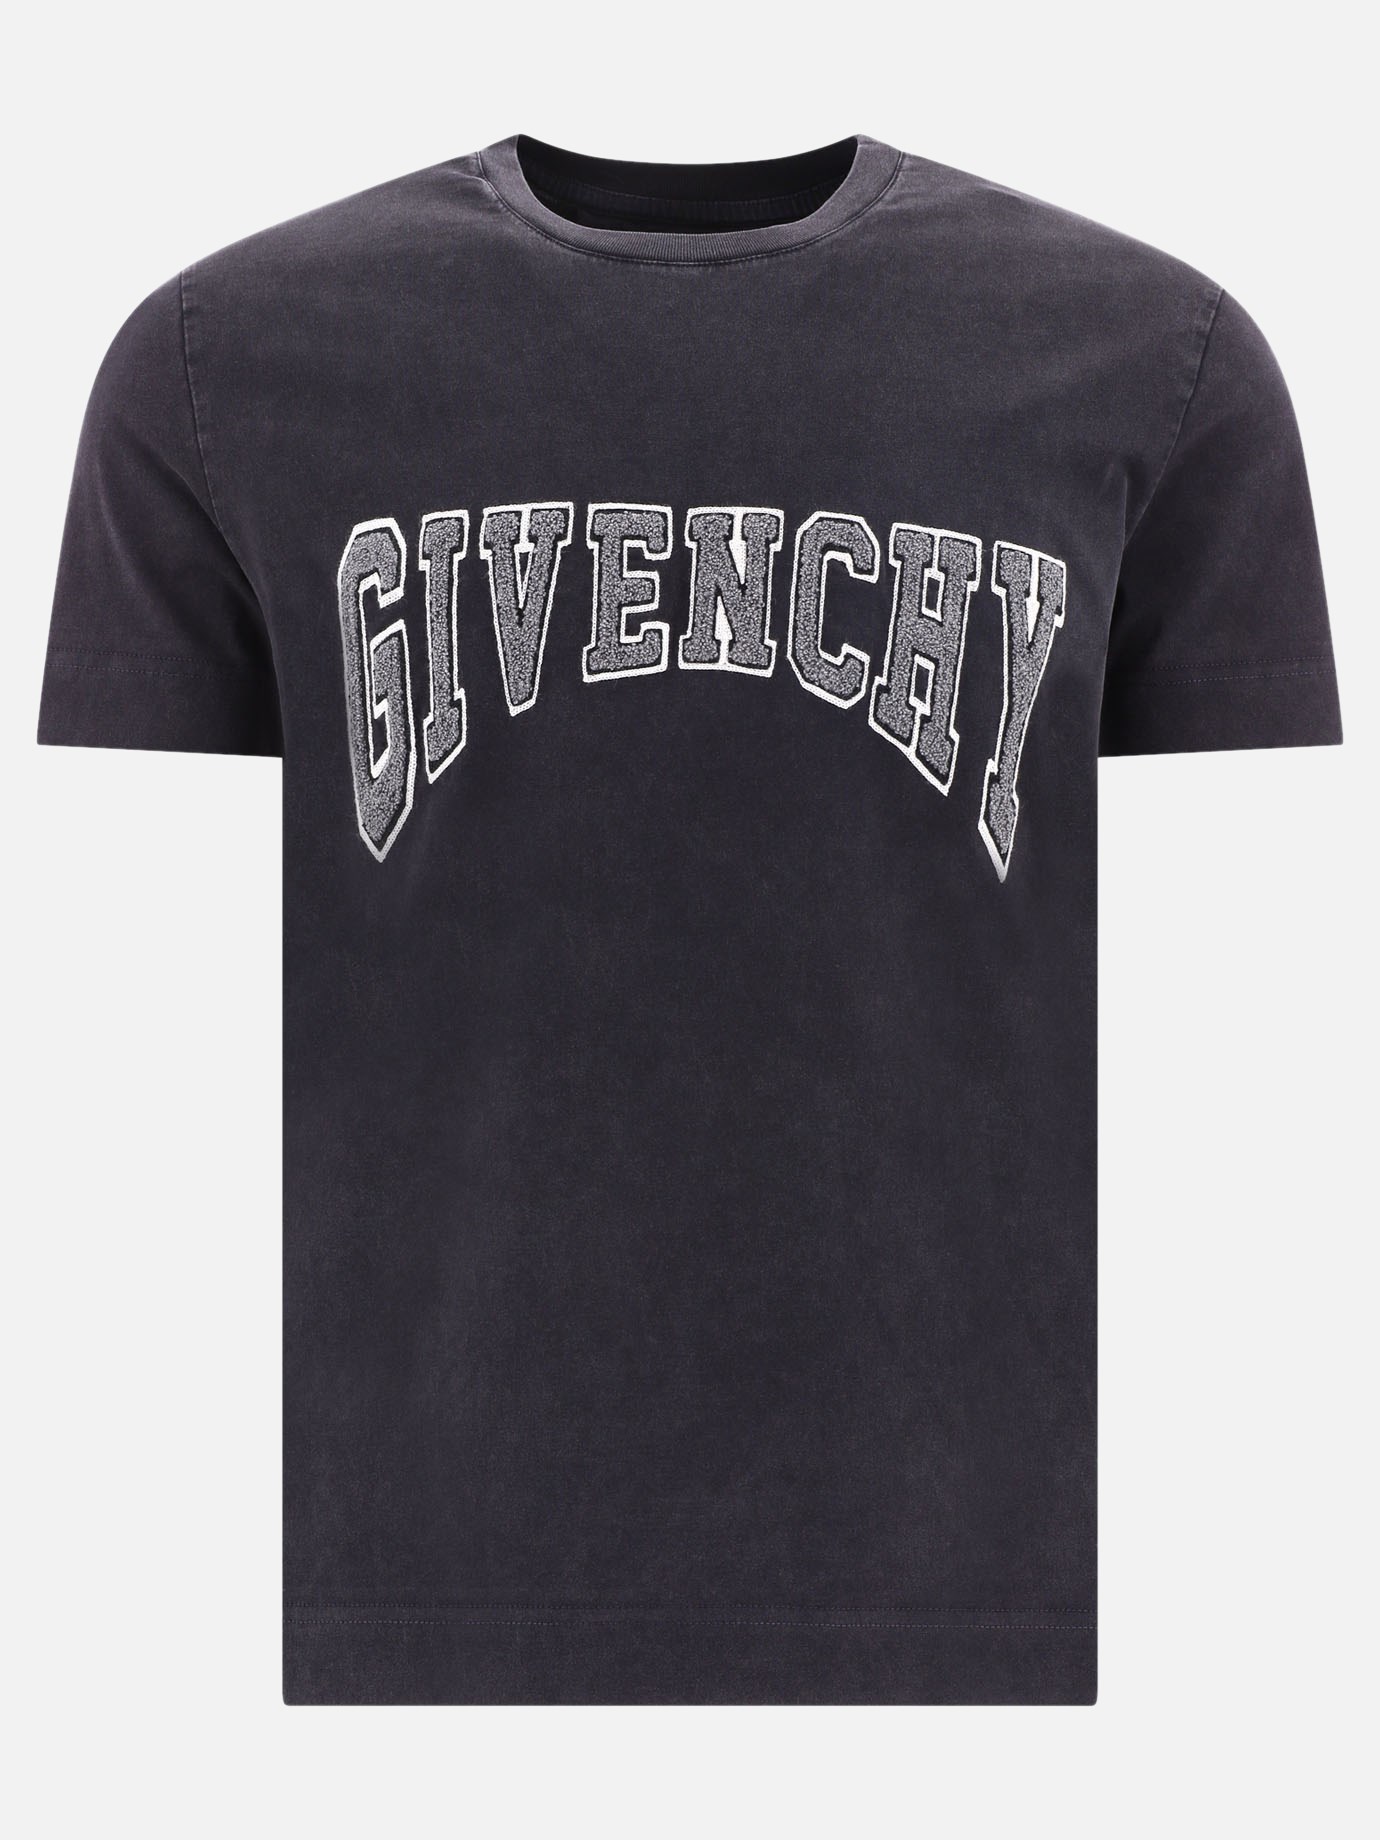  College  t-shirtby Givenchy - 3